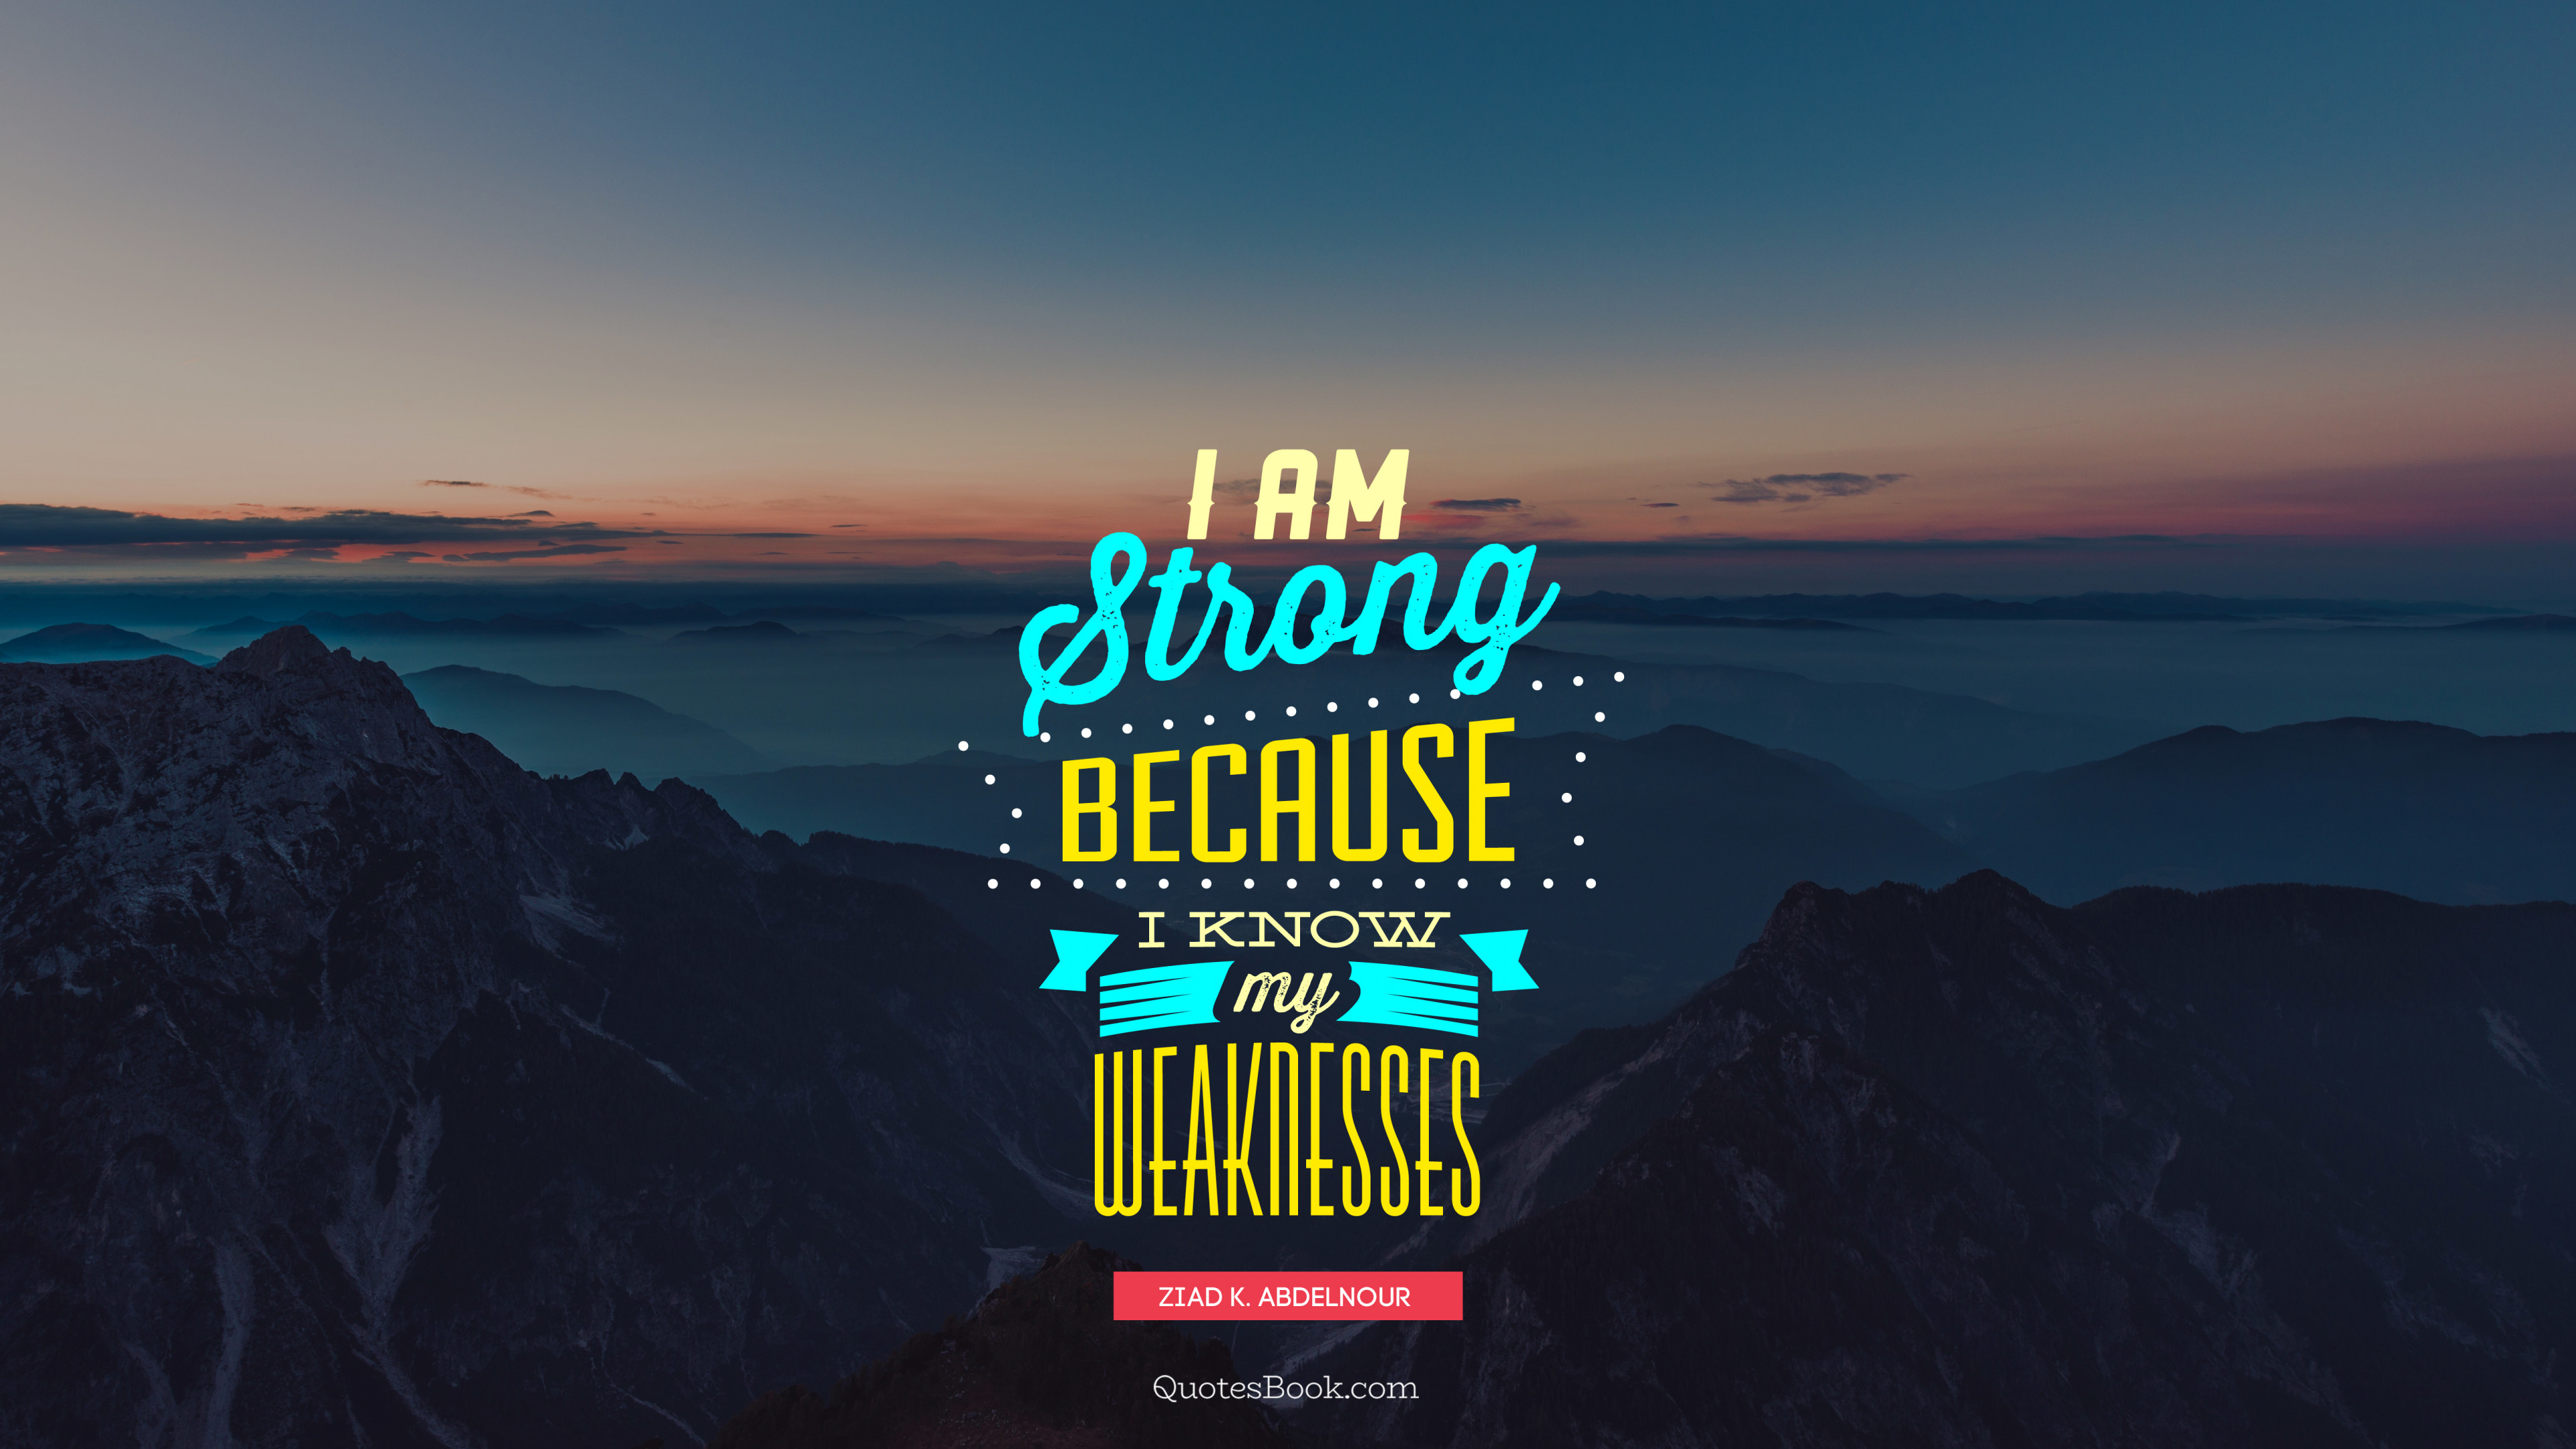 I am strong because I know my weaknesses. - Quote by Ziad K. Abdelnour